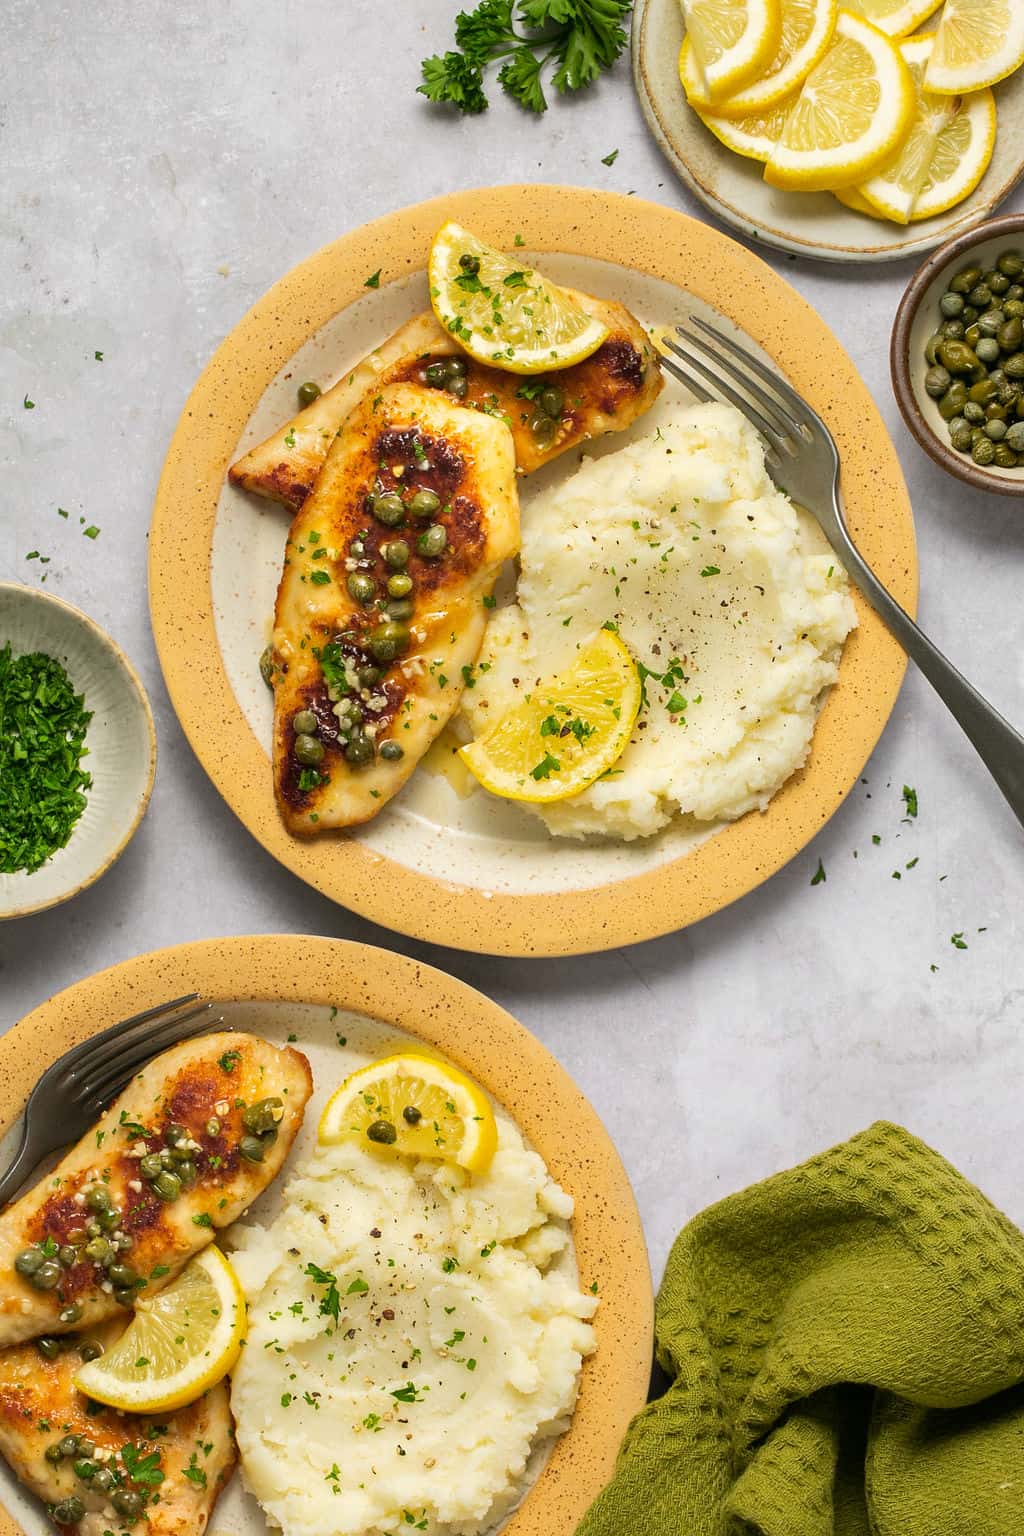 Plates with gluten free chicken piccata on plates with mashed potatoes.